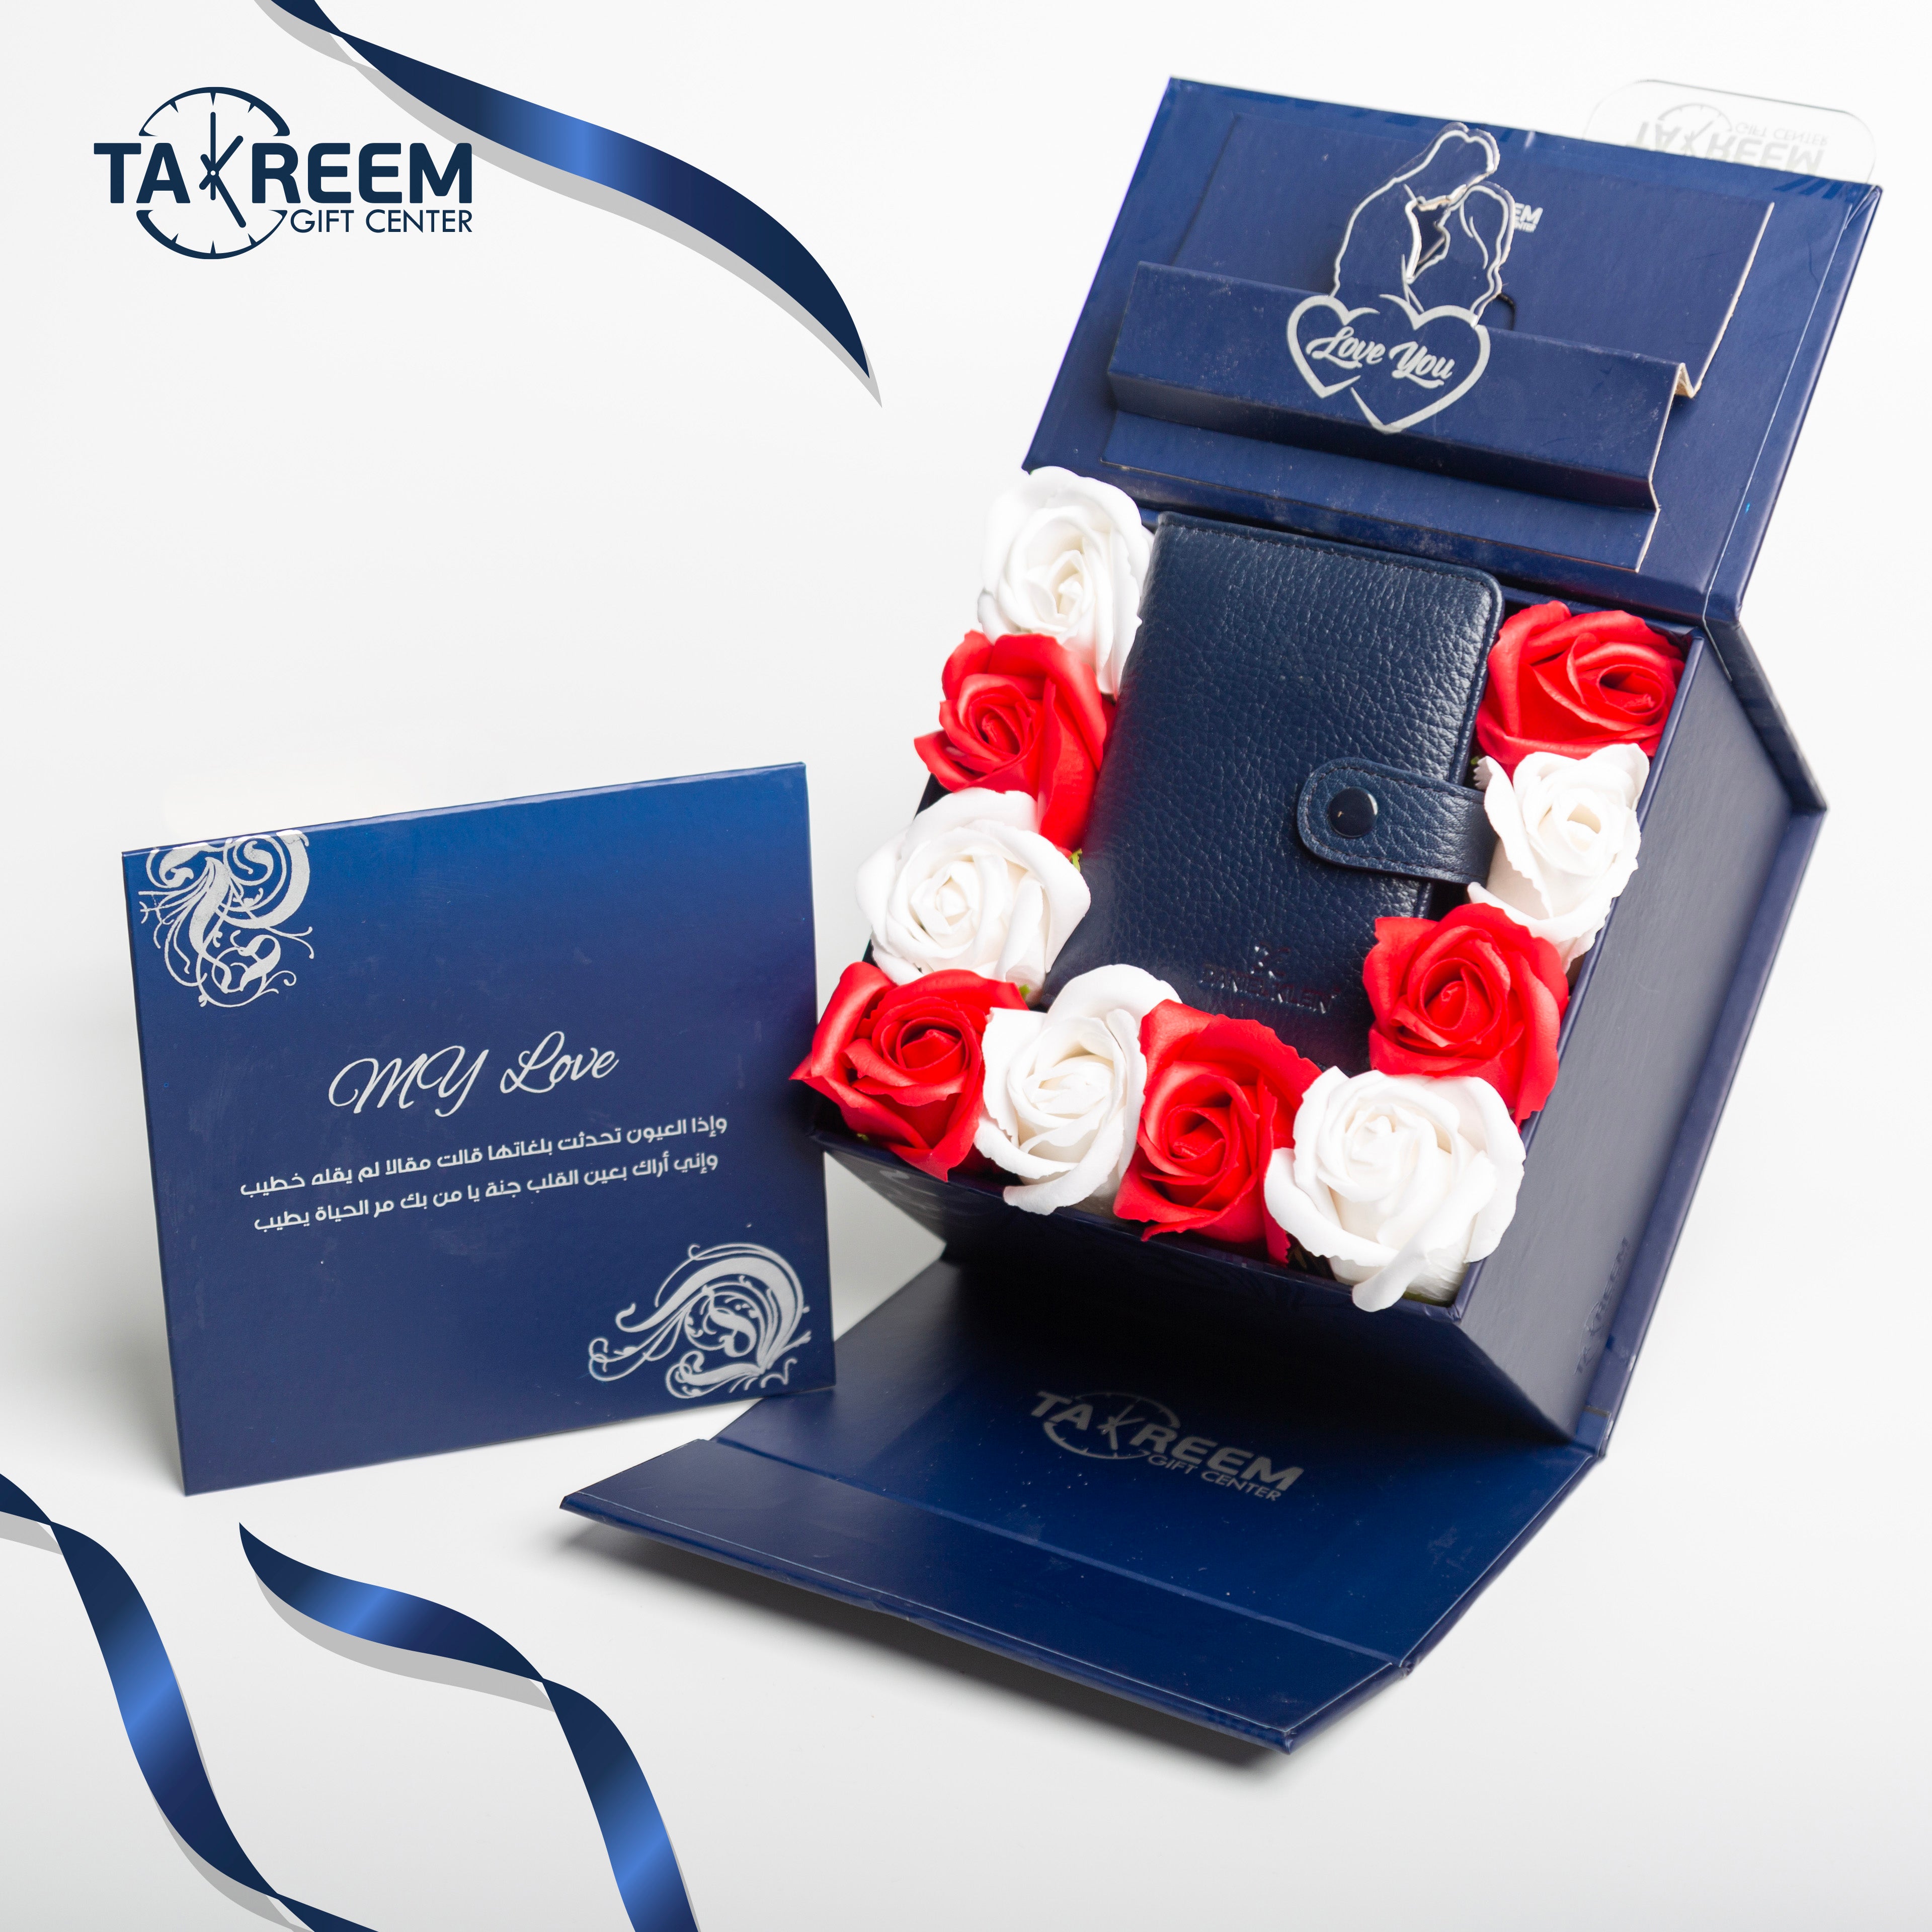 Small Smile5 Gift Boxes  By Takreem Gifts Center